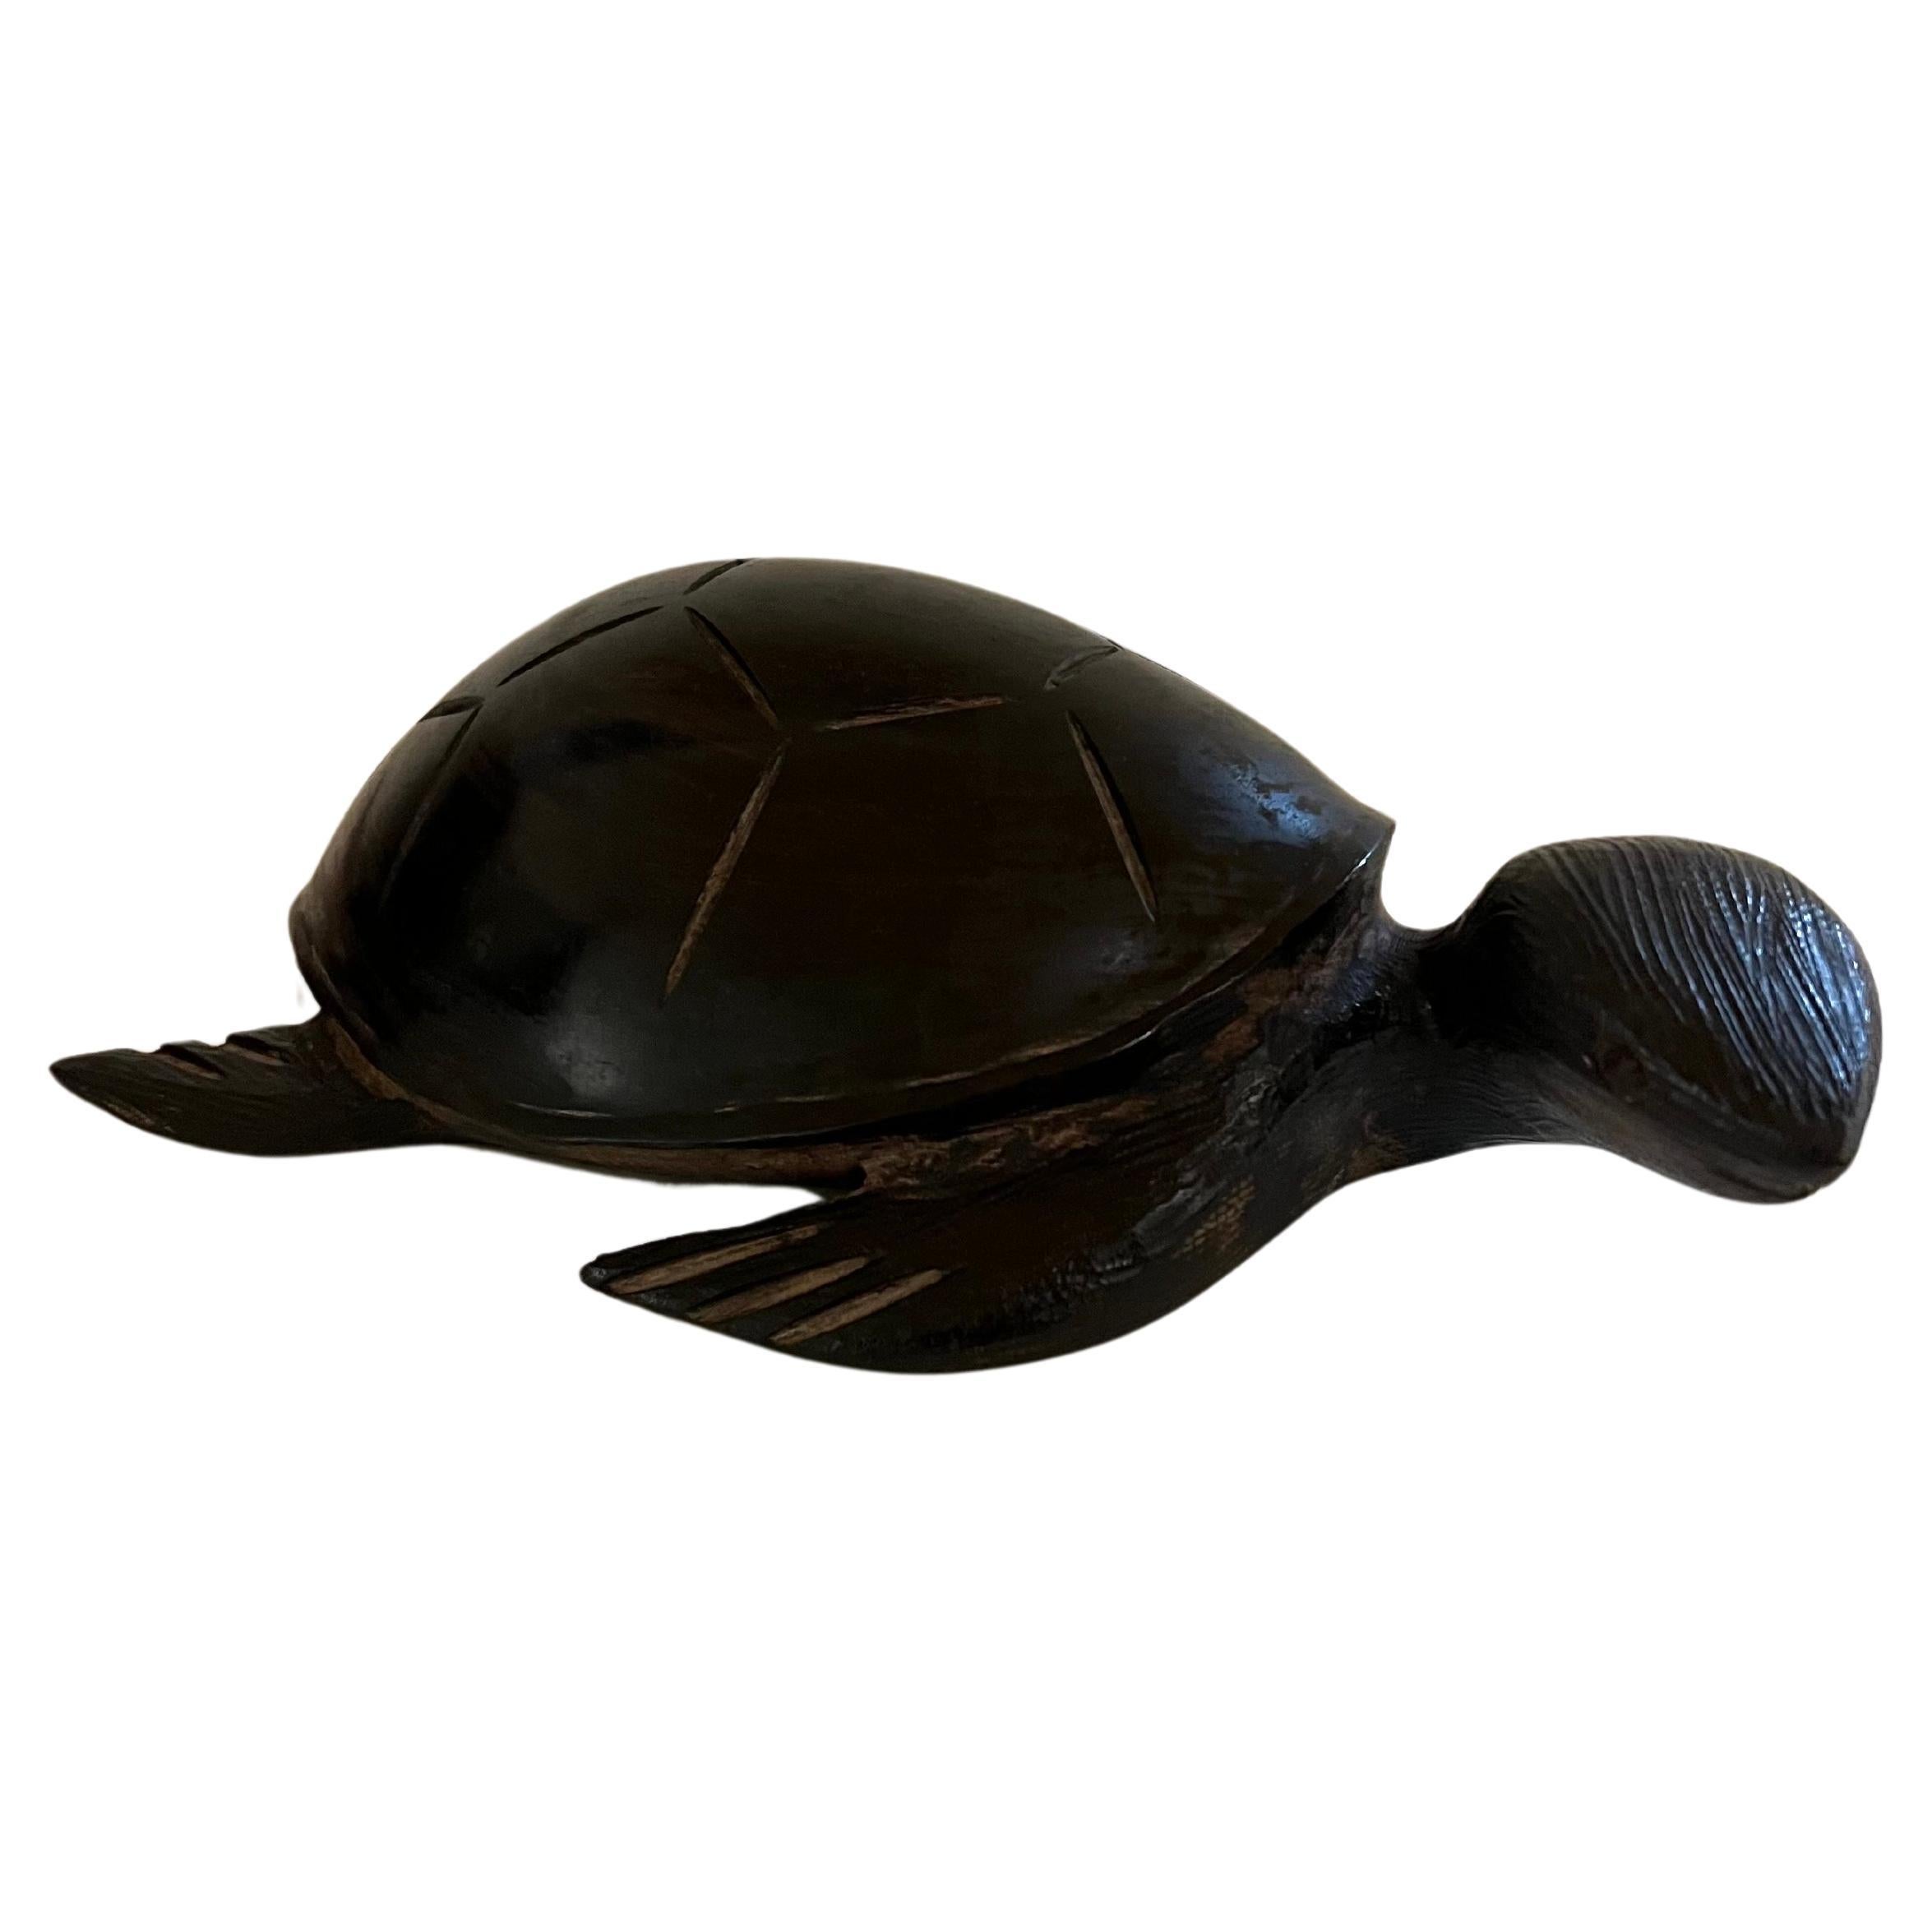 beautiful unique solid hand-carved ironwood turtle sculpture with beautiful detail great condition and great subject, circa 1970's.